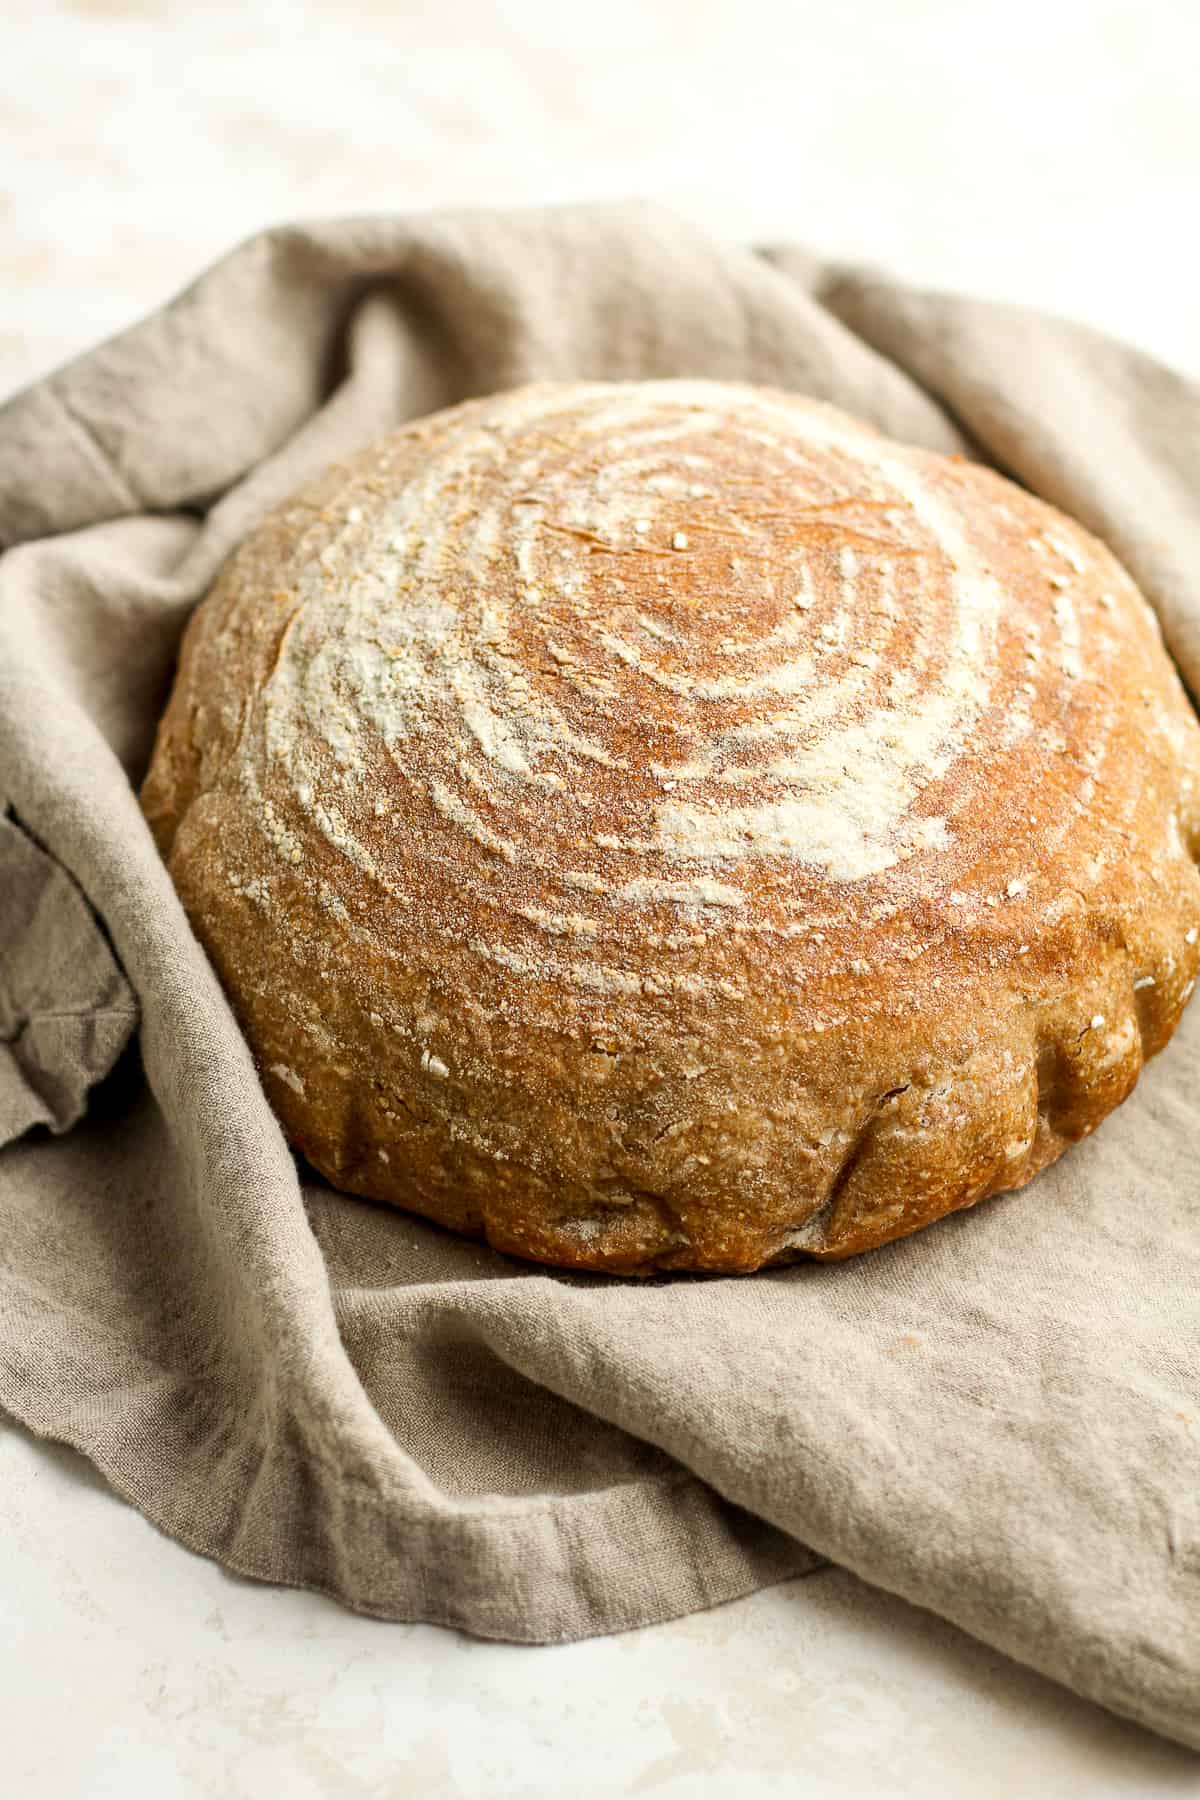 Side view of a round loaf of just baked multigrain sourdough.